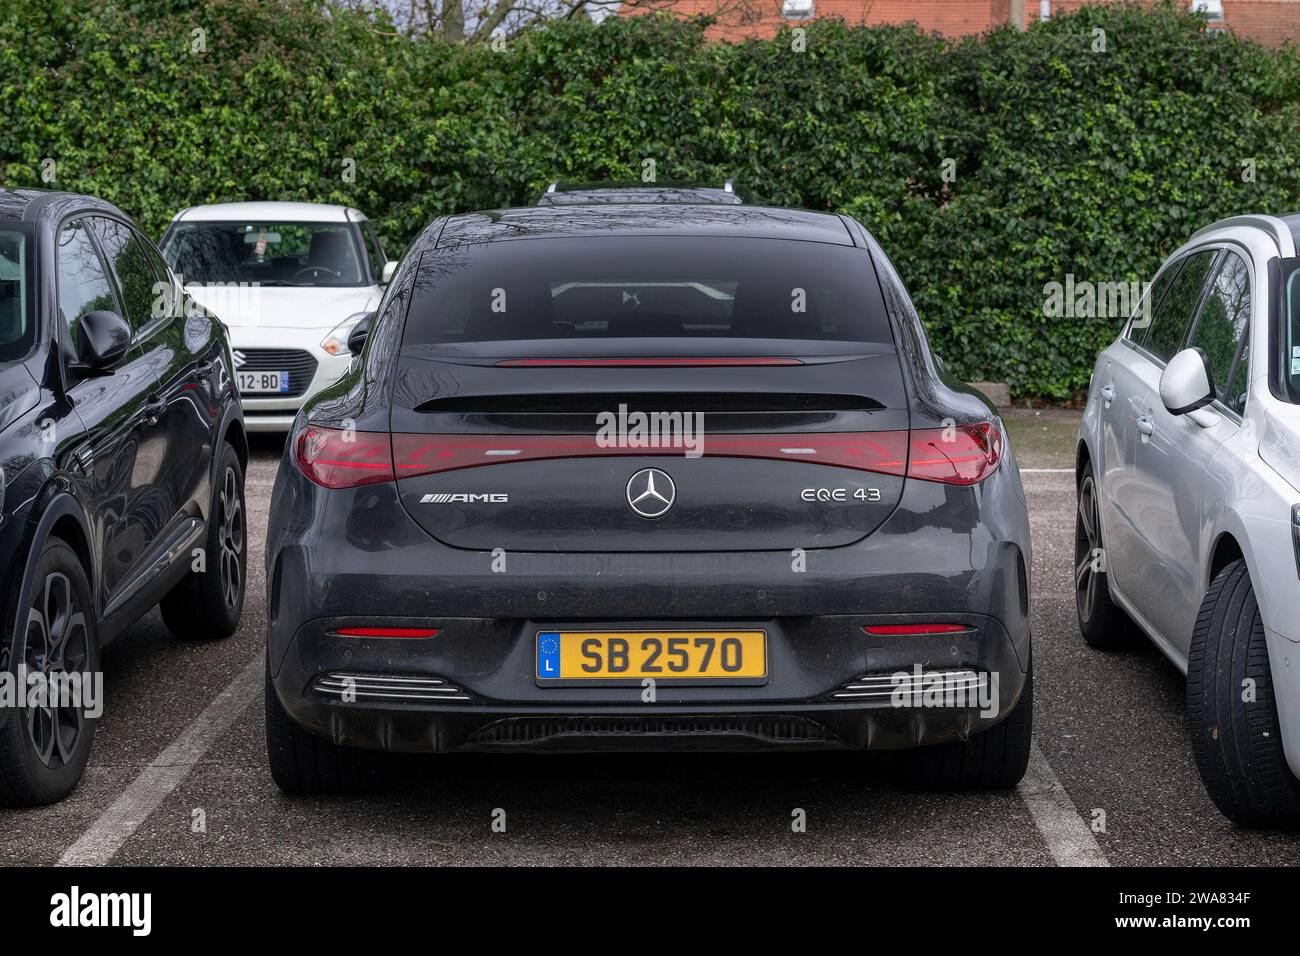 Nancy, France - Obsidian Black Metallic Mercedes-AMG EQE 43 4MATIC parked in a parking lot. Stock Photo